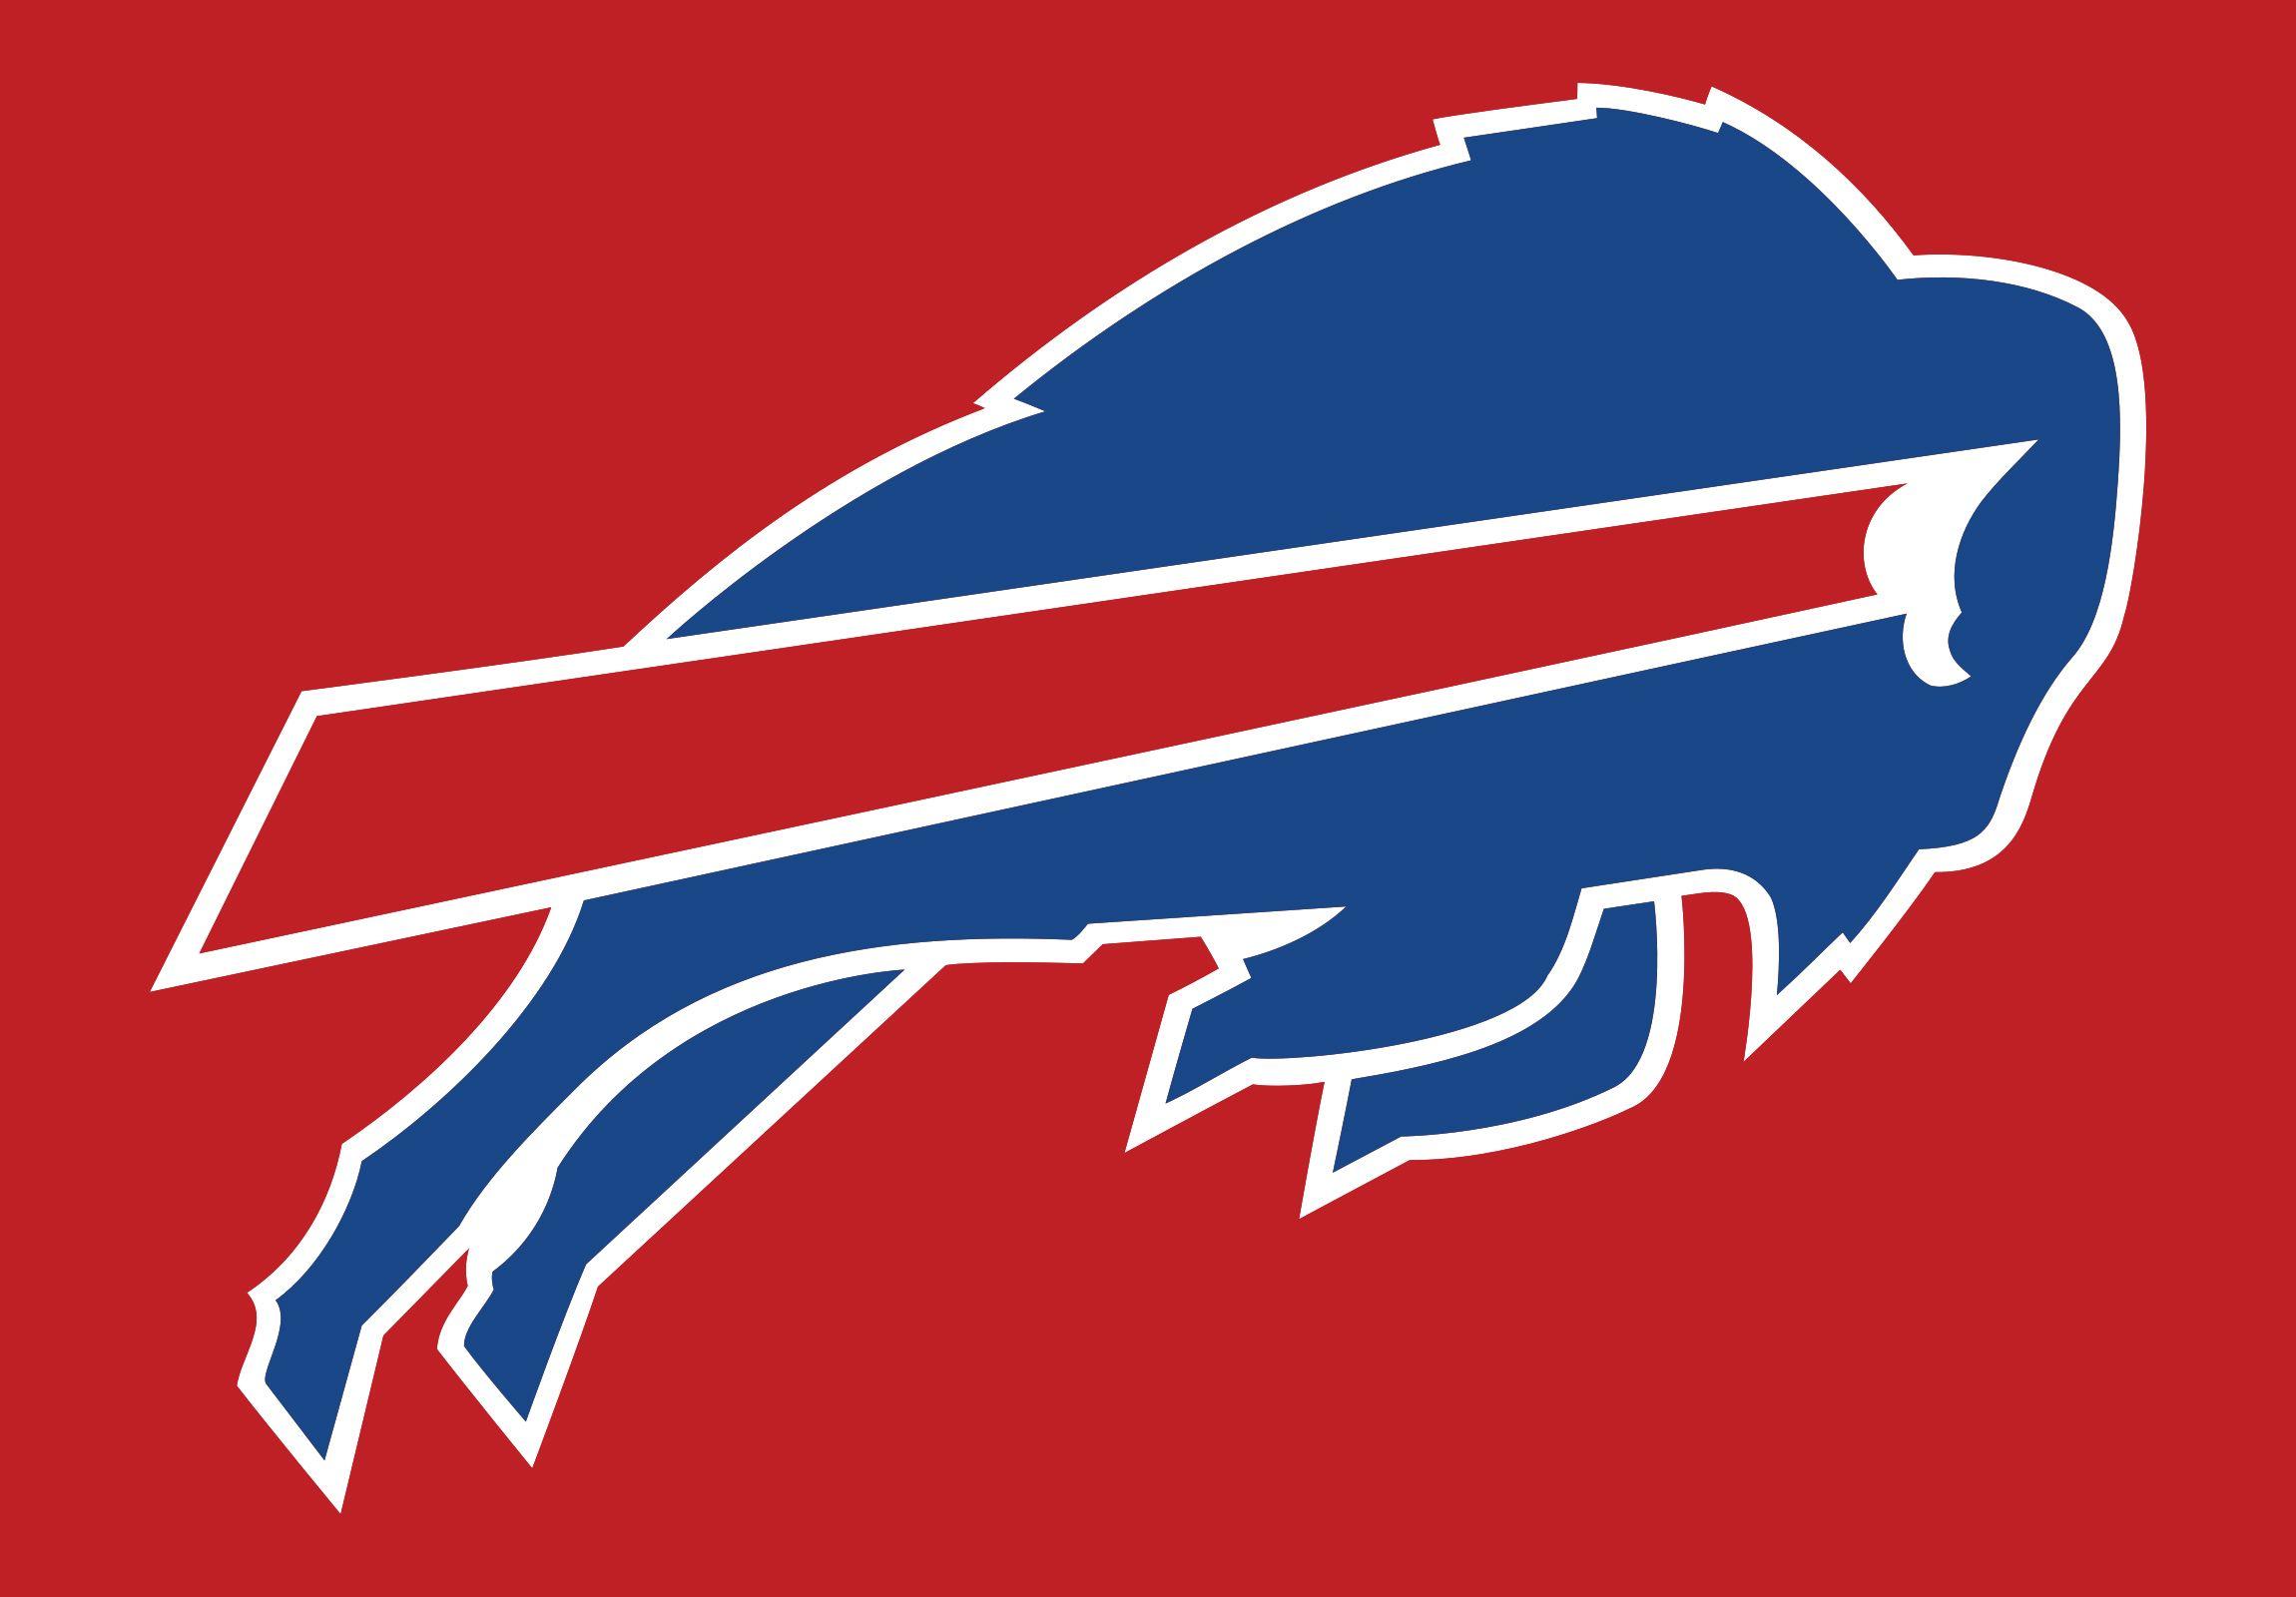 Buffalo Bills Logo - Buffalo Bills Logo, Buffalo Bills Symbol, Meaning, History and Evolution